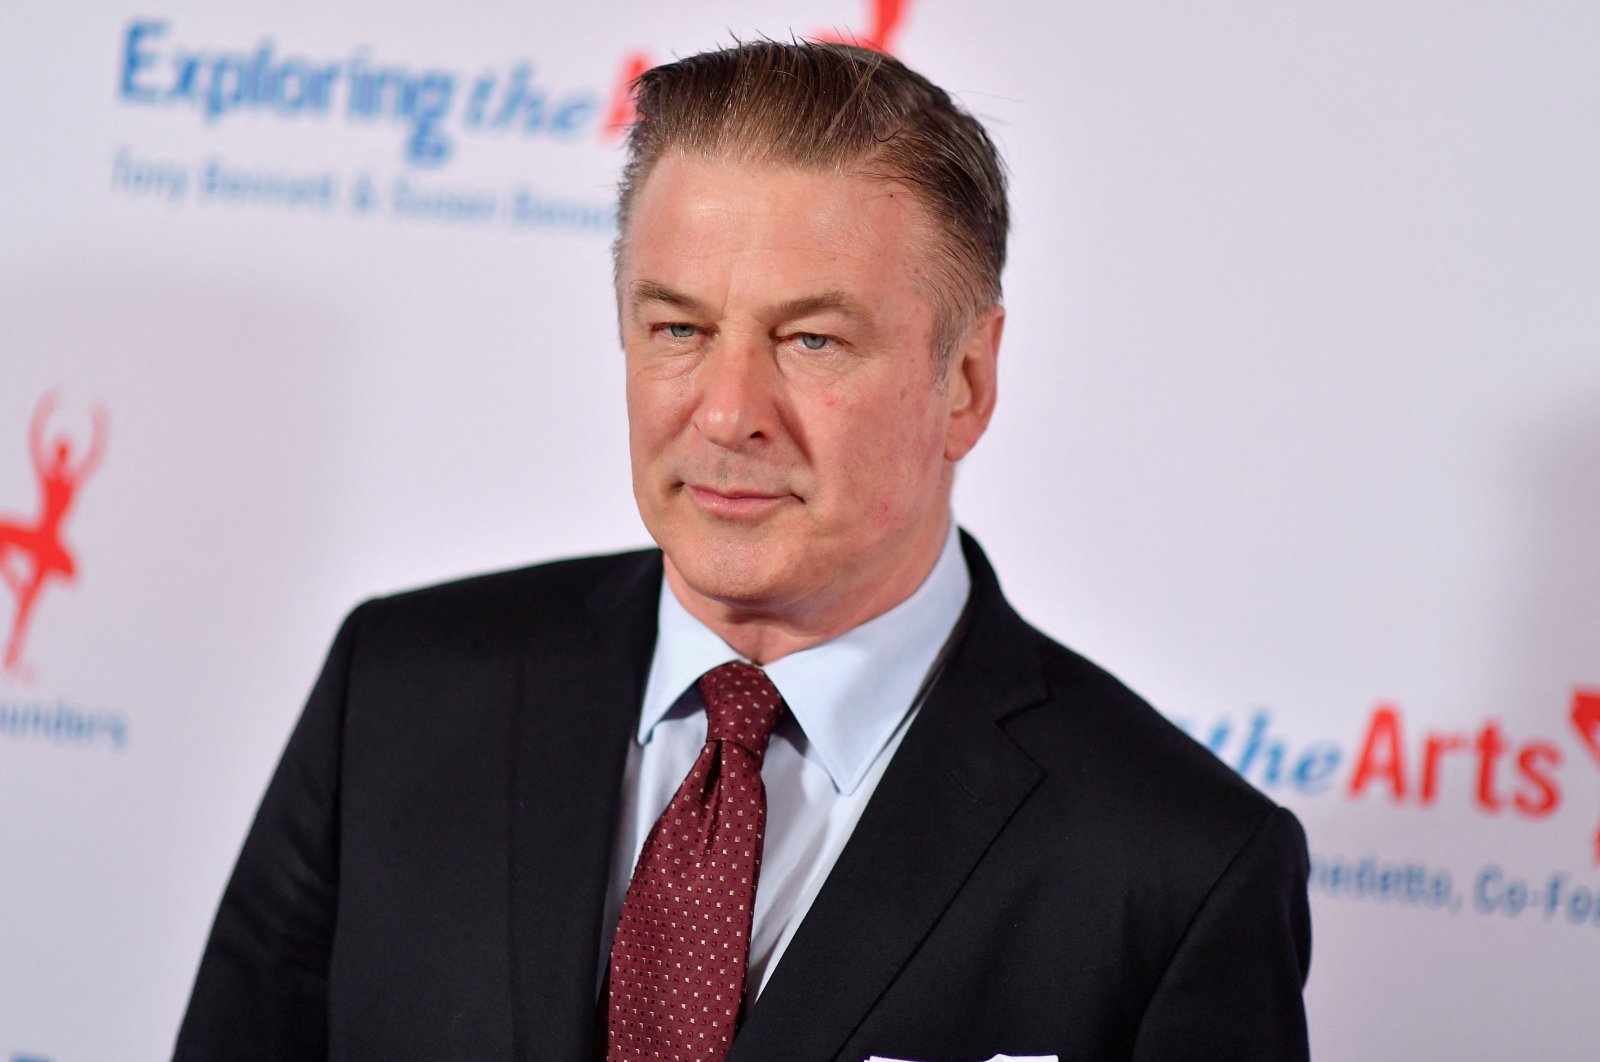 Actor Alec Baldwin attends the &quot;Exploring the Arts&quot; 20th anniversary Gala at Hammerstein Ballroom in New York City, U.S., April 12, 2019. (AFP Photo)